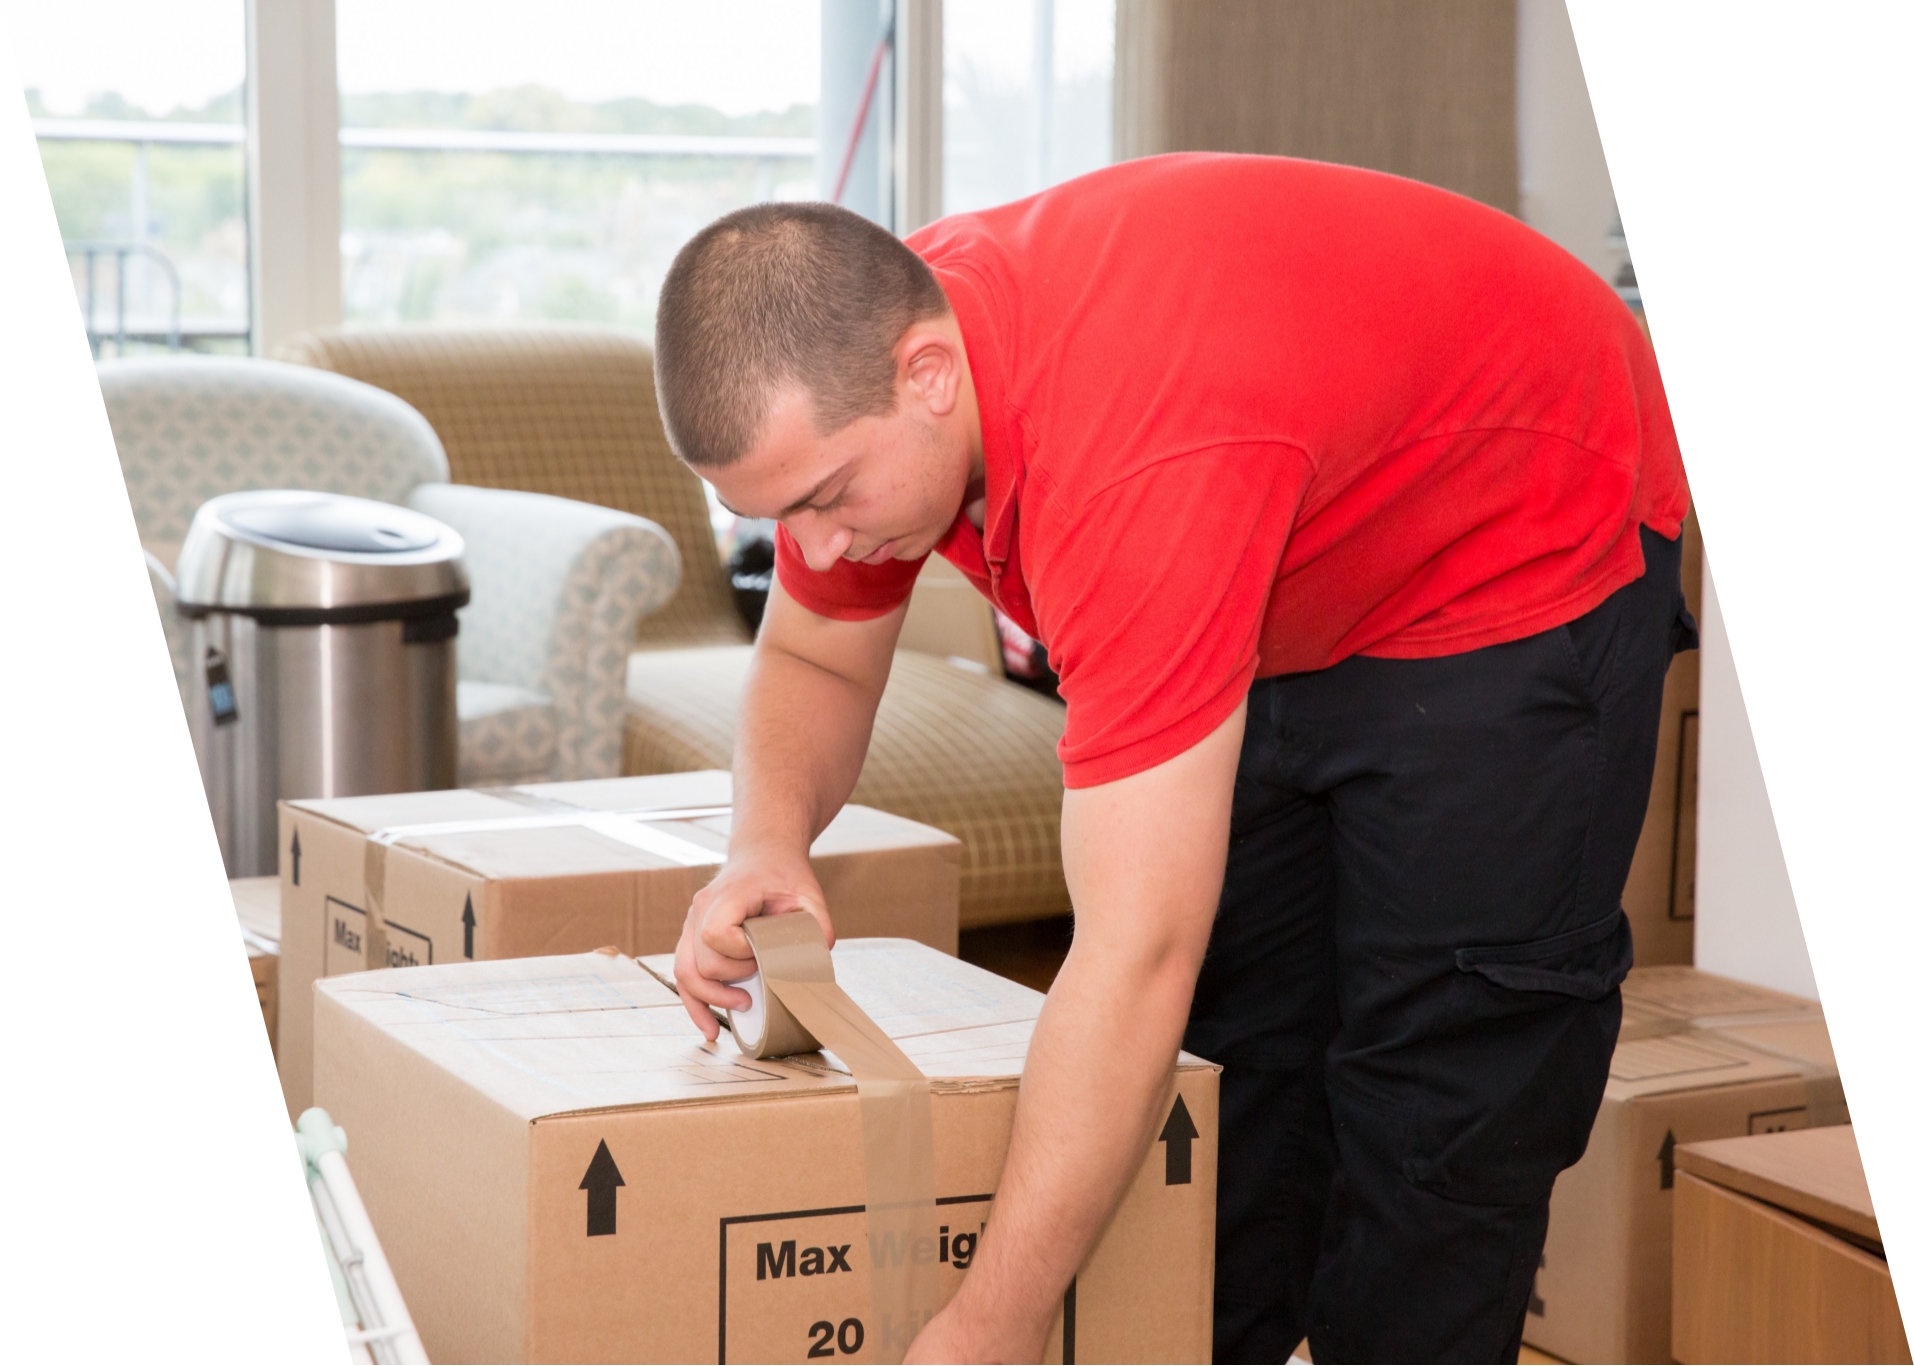 The image shows a Fantastic Removals specialist who is packing the belongings of a customer in a large box.